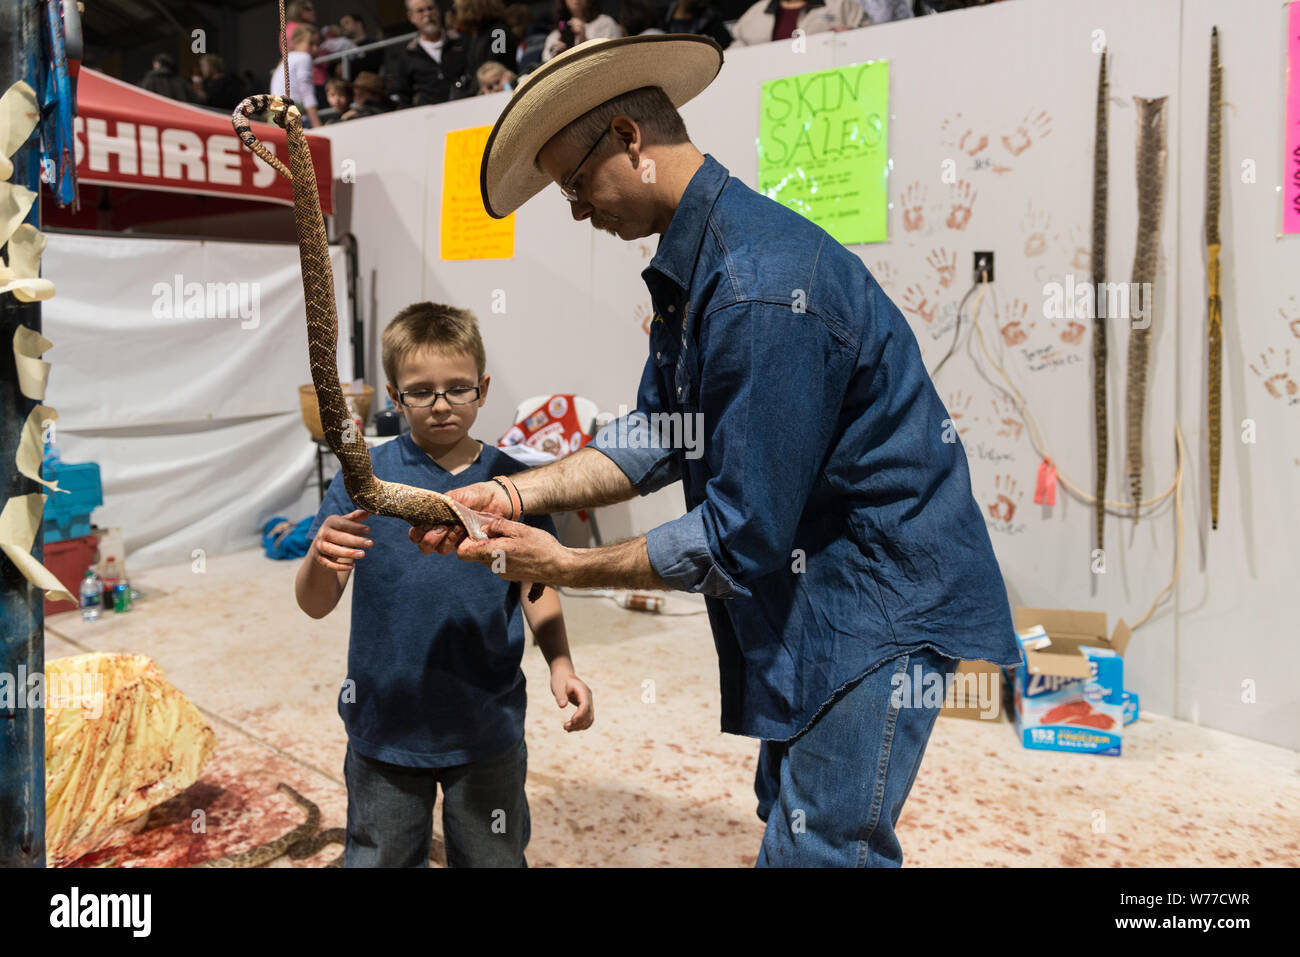 A skilled snake-skinner demonstrates his craft to a young visitor at the World's Largest Rattlesnake Roundup in Sweetwater, Texas Physical description: 1 photograph : digital, tiff file, color.  Notes: Since 1958, the event, sponsored and run by the Sweetwater Jaycees, has been held annually in March at the Nolan County Coliseum. The Round-Up was started as a way to control the population of snakes in their brushy area of Texas. According to the Jaycees, the large population of rattlesnakes was harming local farmers and ranchers who were losing their livestock to these natural predators. Today Stock Photo